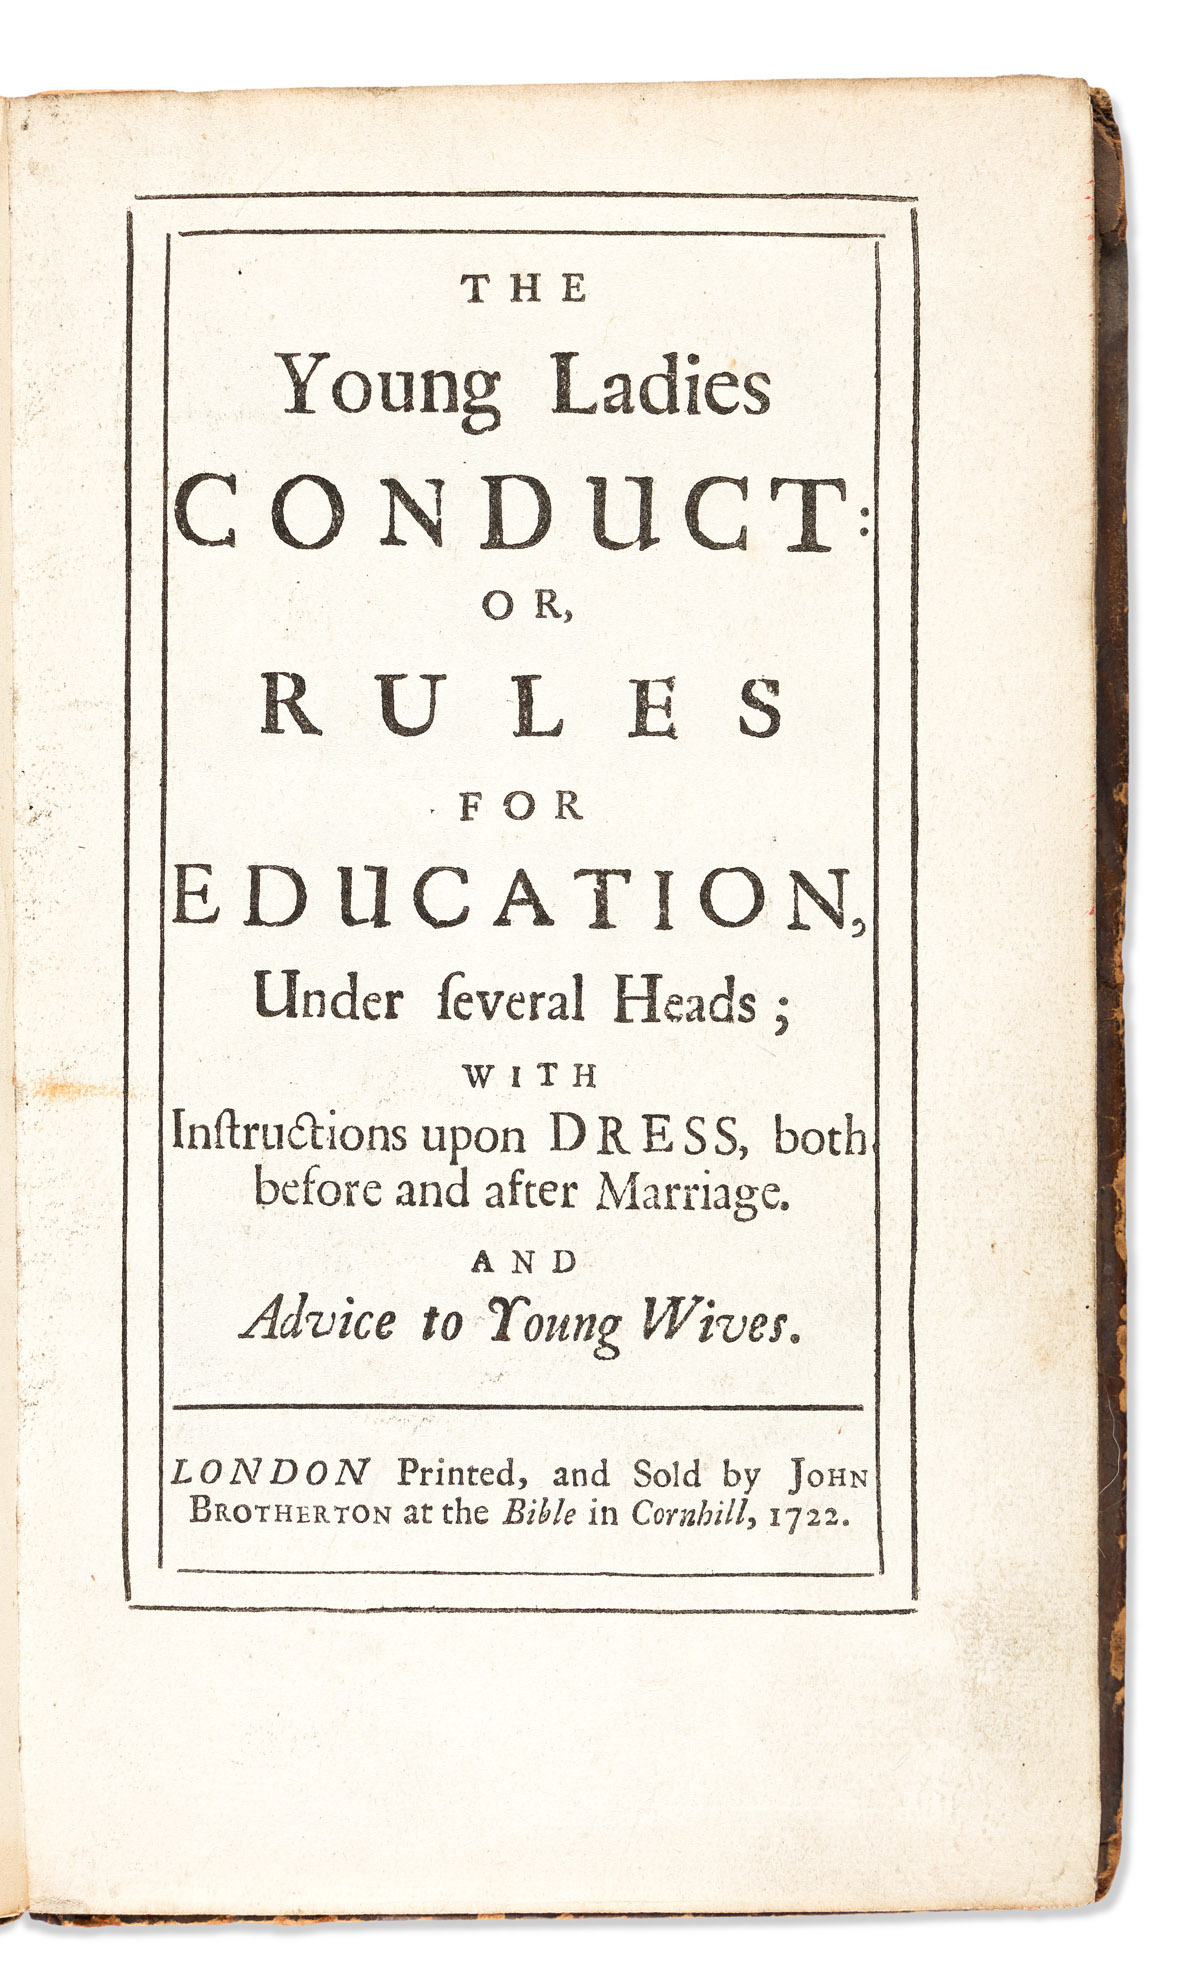 Essex, John (fl. circa 1722) The Young Ladies Conduct: or, Rules for Education, under Several Heads; with Instructions upon Dress, both